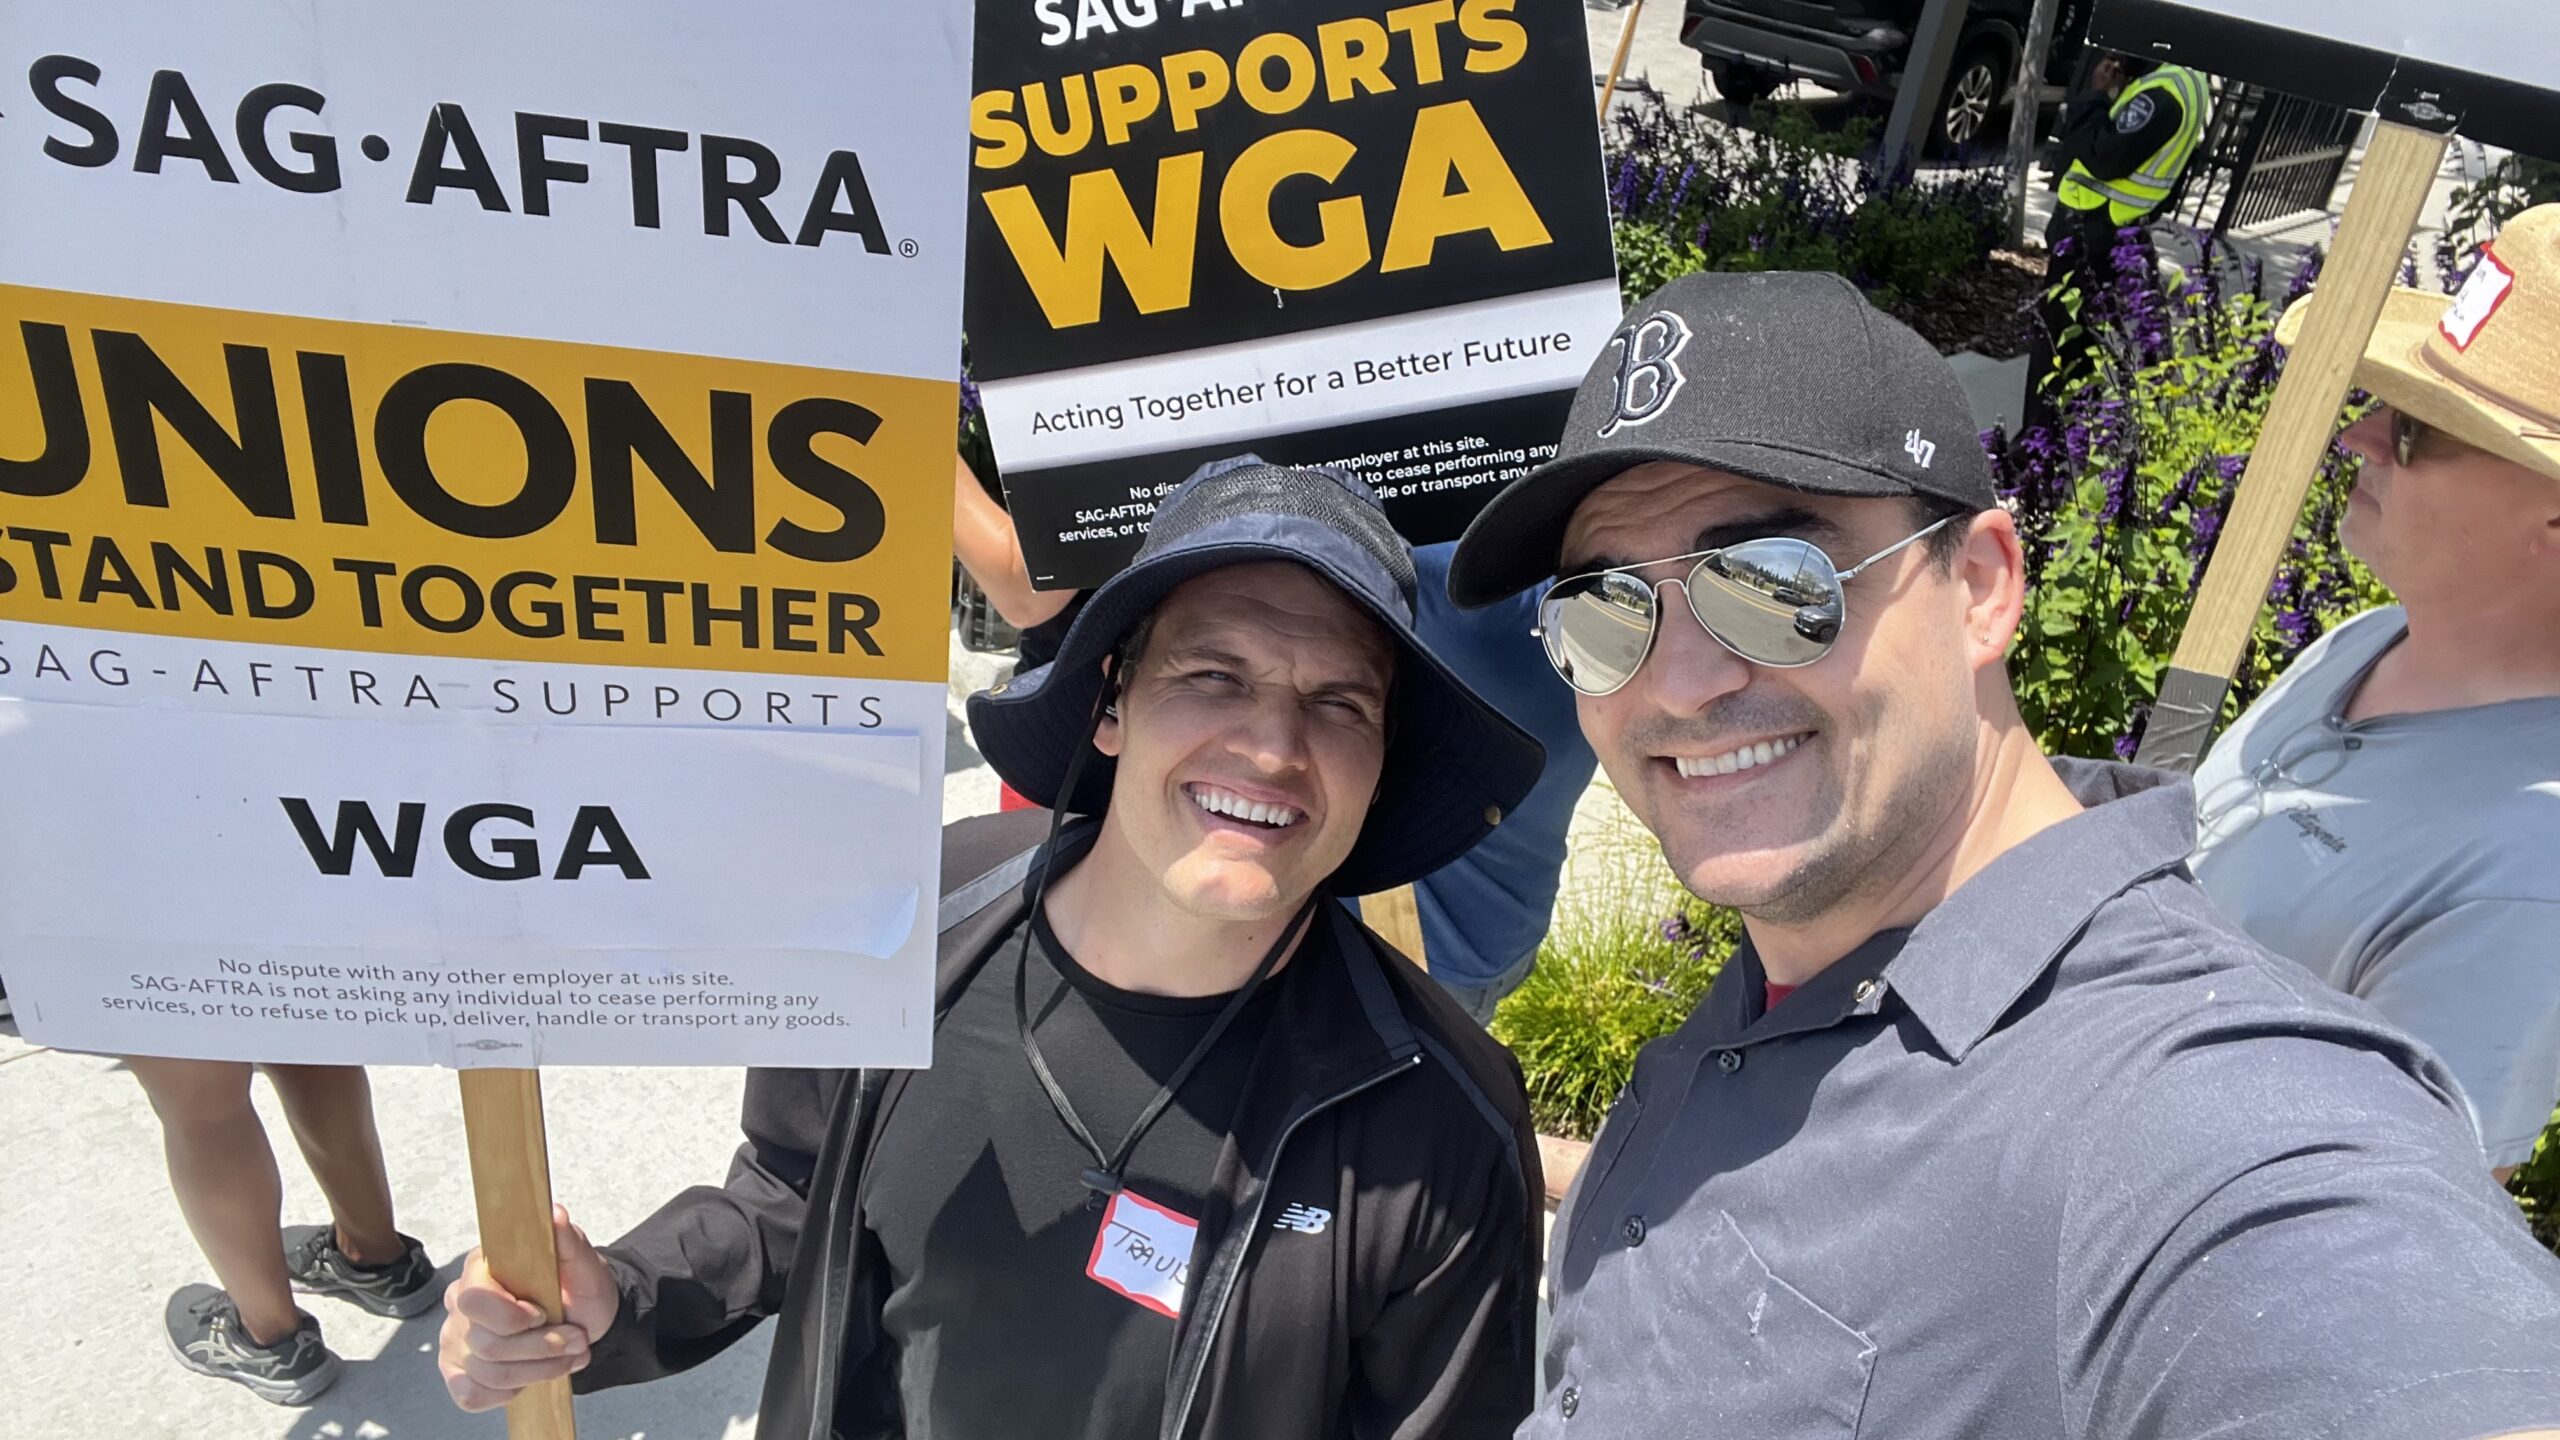 Walking the picket line for the WGA outside of Netflix in Hollywood, CA with my buddy Travis J. Dixon